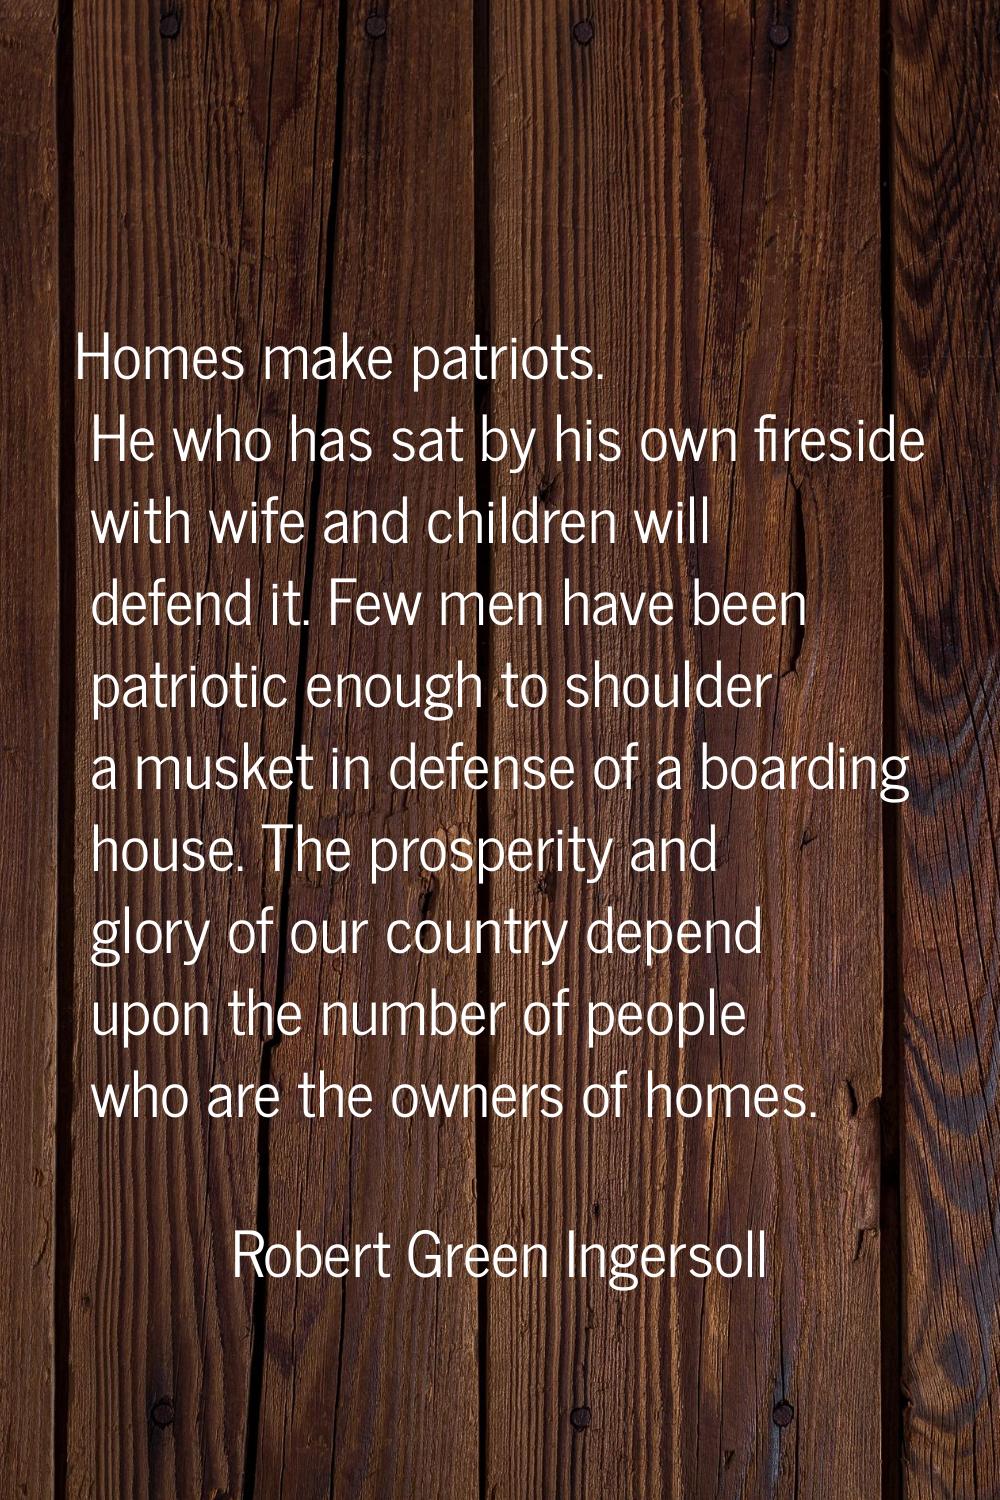 Homes make patriots. He who has sat by his own fireside with wife and children will defend it. Few 